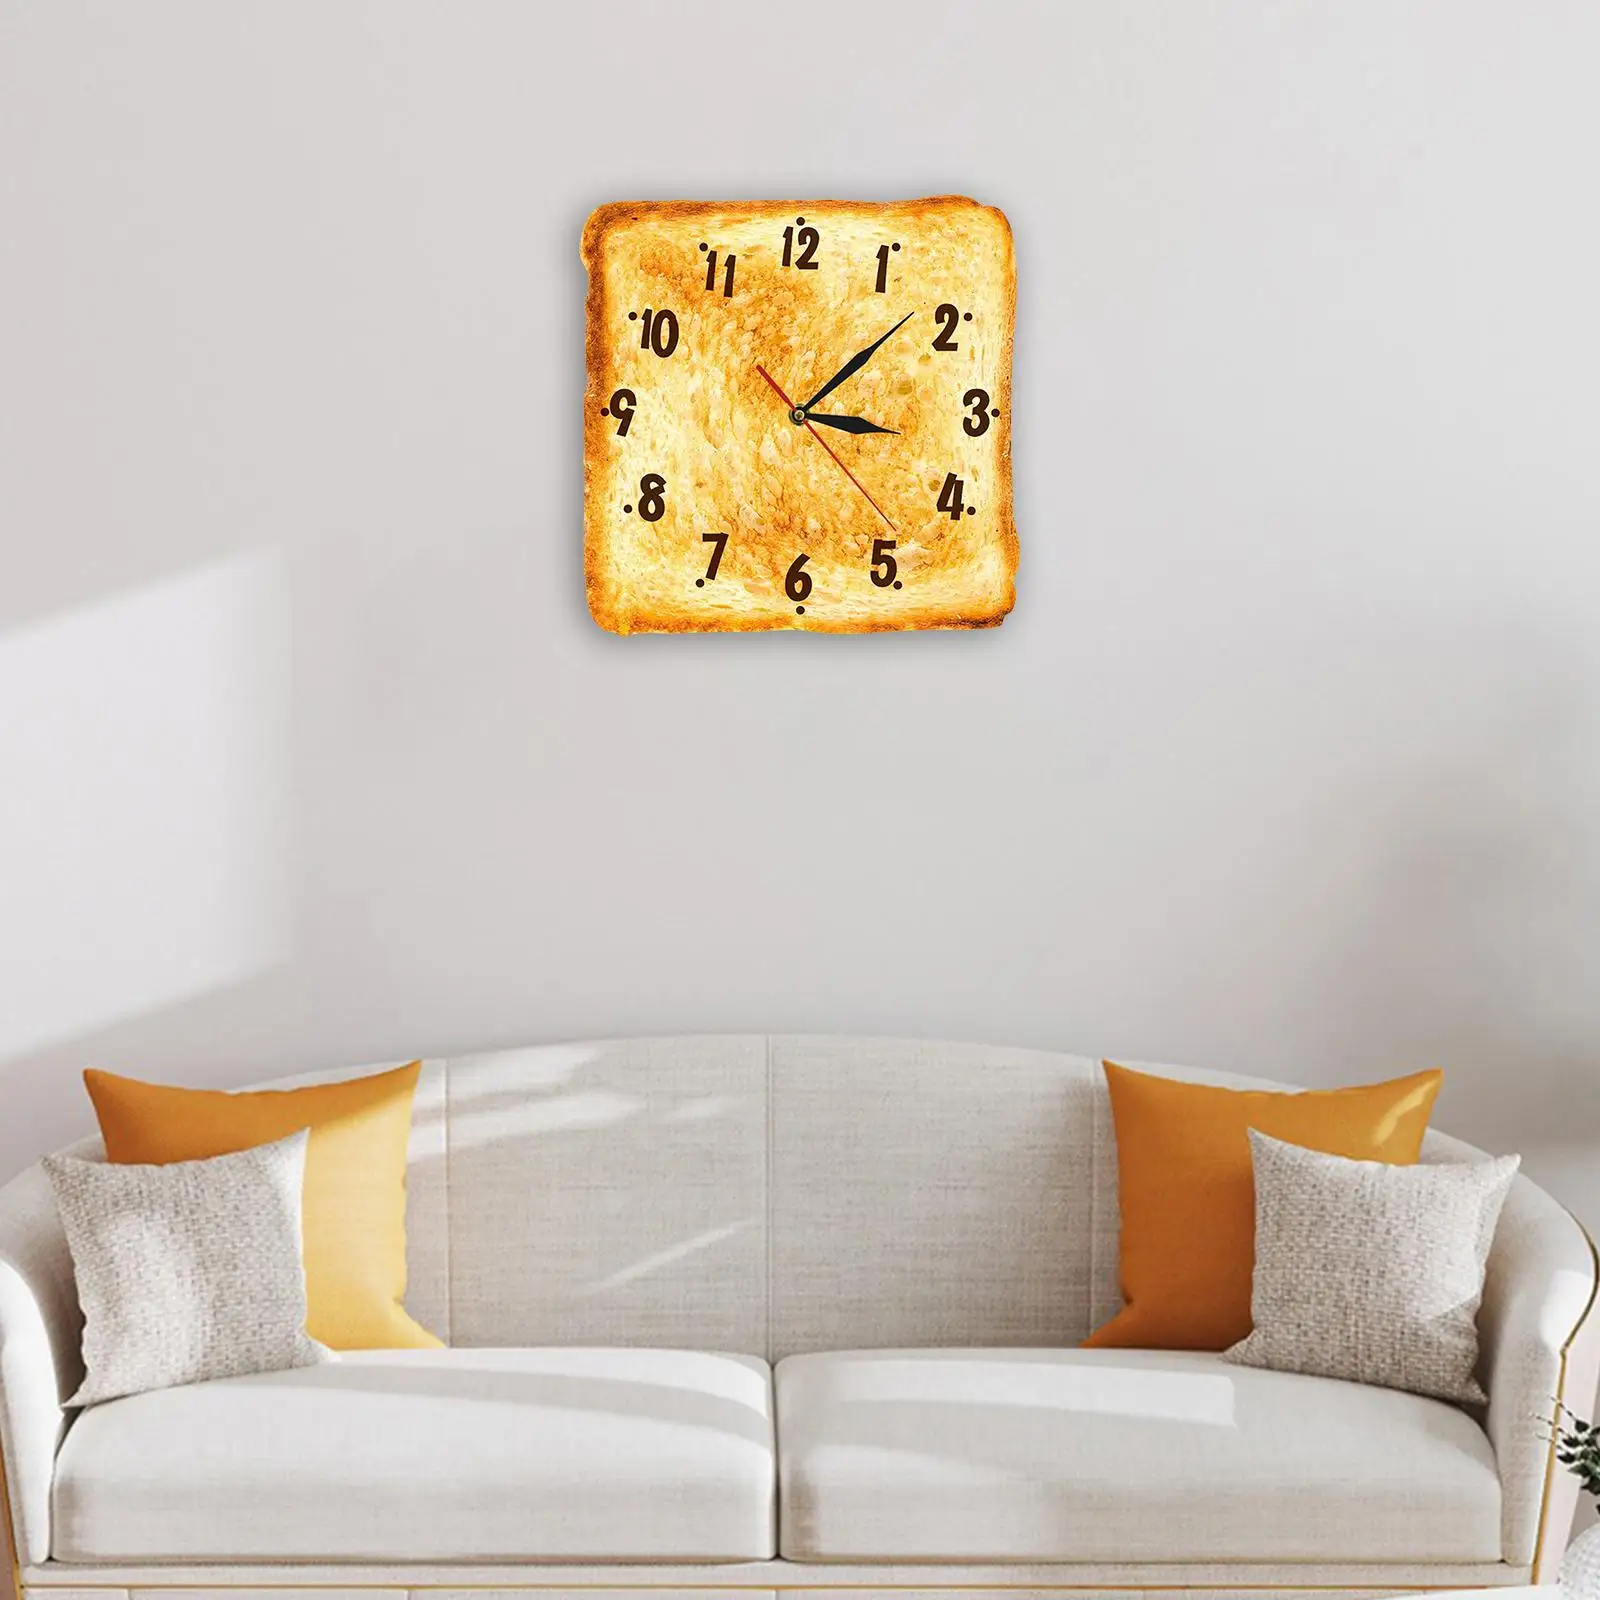 Realistic Toasted Bread Wall Clock Gourmet Decorative 30cm for Dining Room